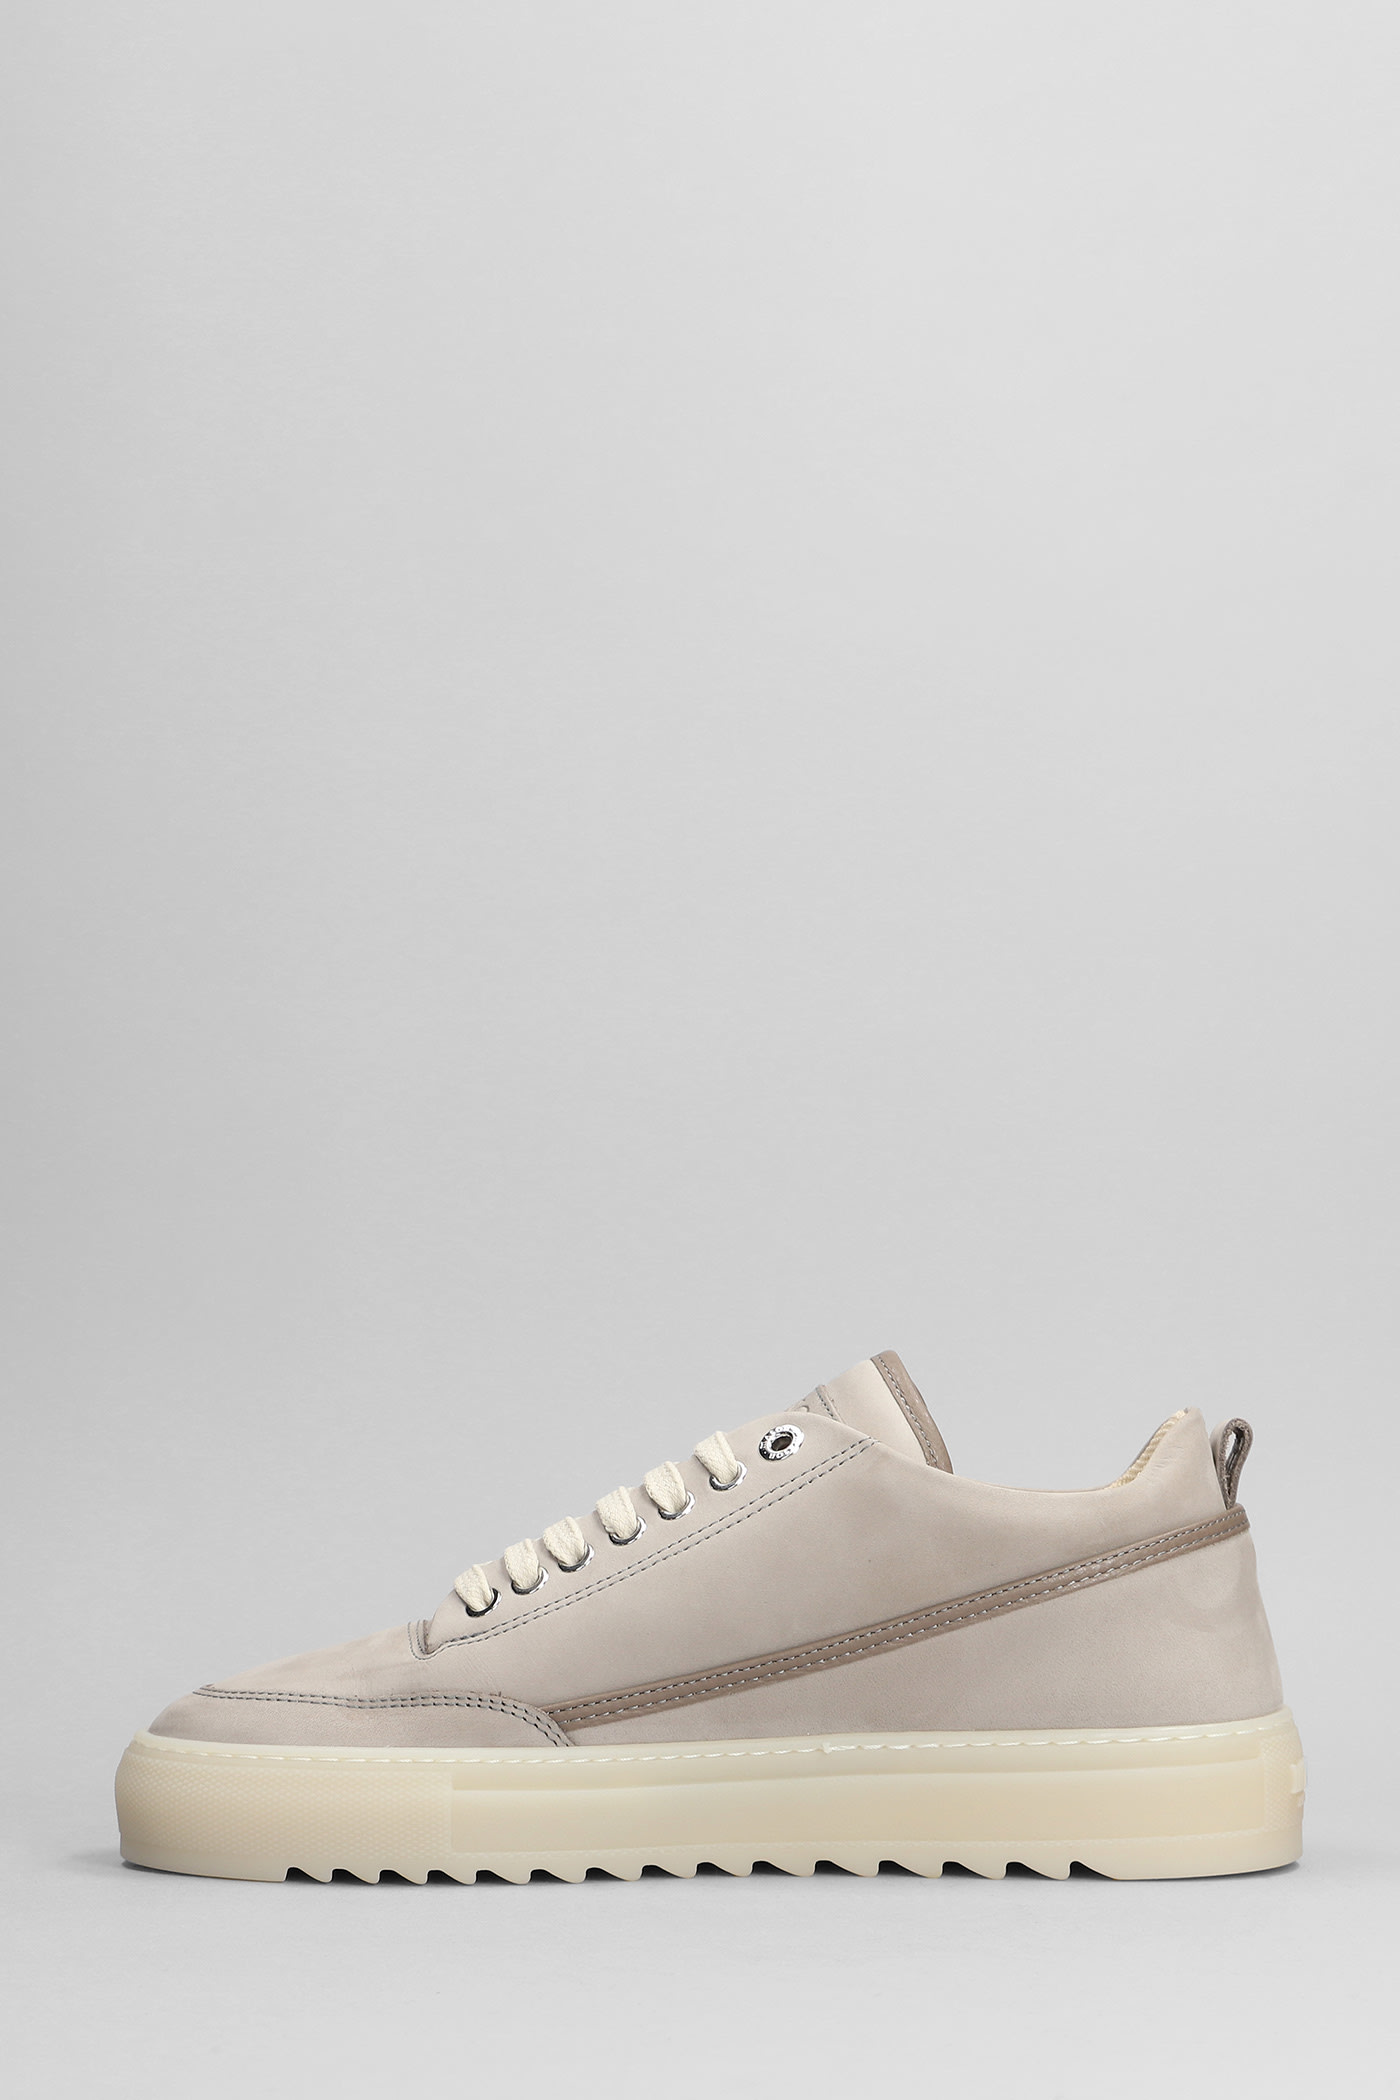 Shop Mason Garments Torino Sneakers In Taupe Leather